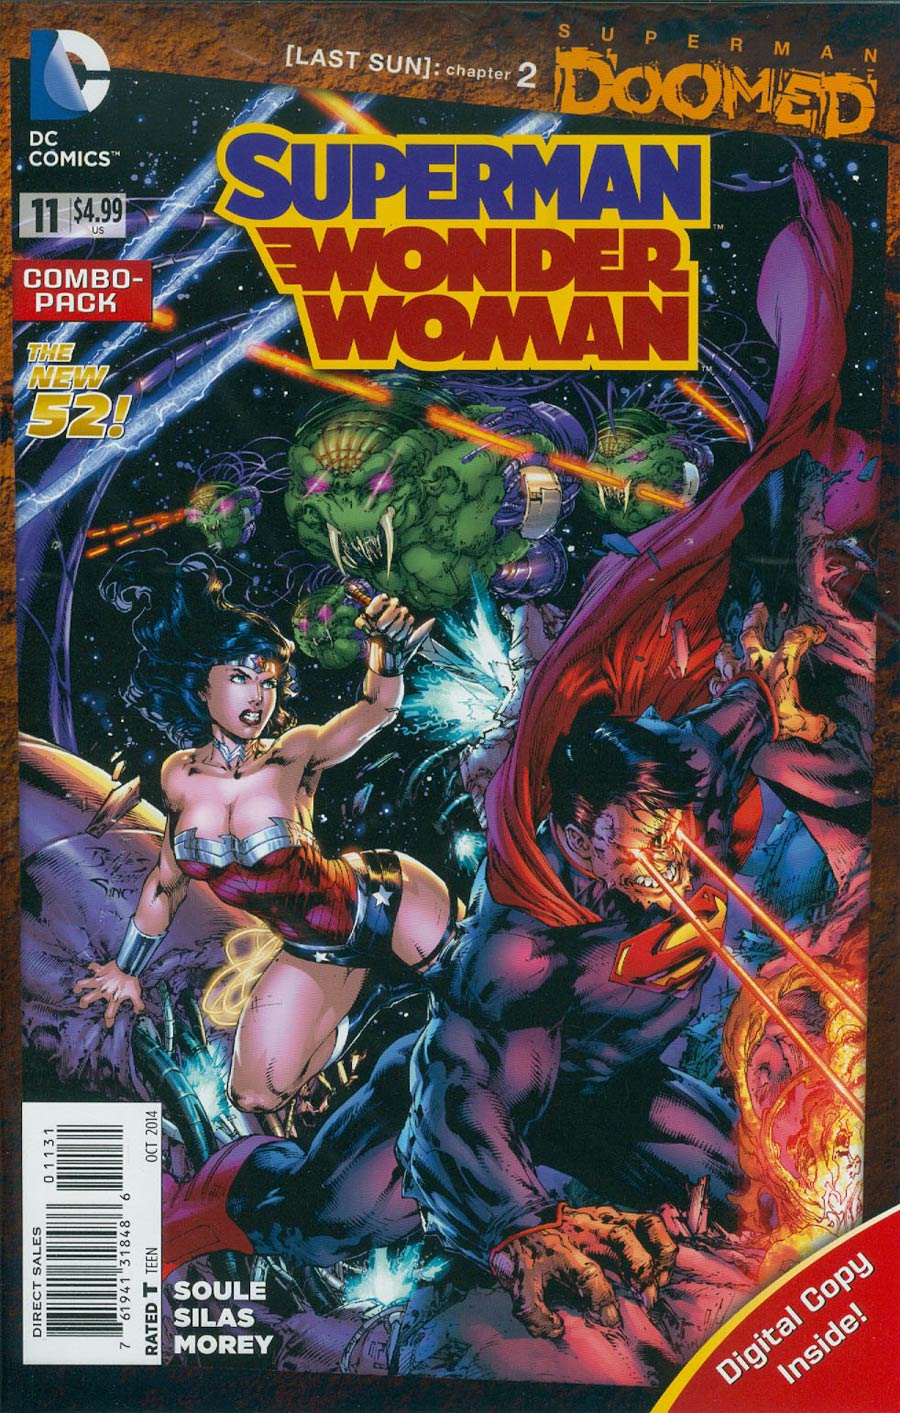 Superman Wonder Woman #11 Cover D Combo Pack Without Polybag (Superman Doomed Tie-In)